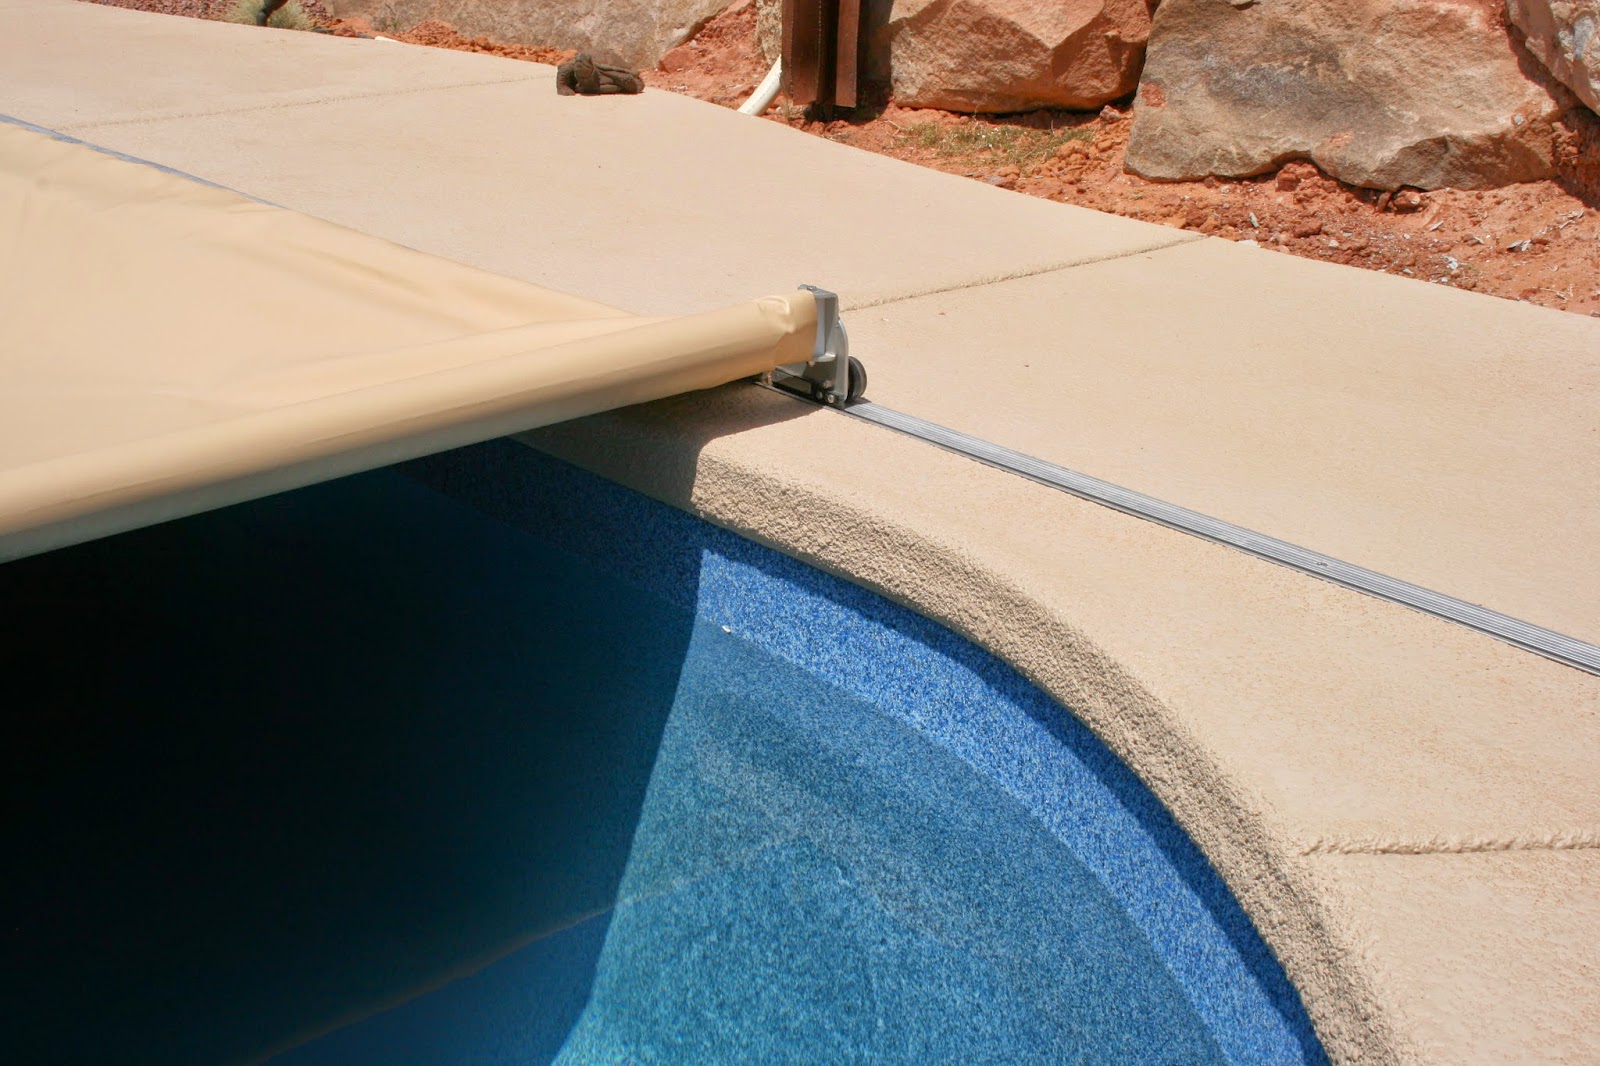 COVERSTAR - Safety Swimming Pool Covers for Automatic and Solid & Mesh